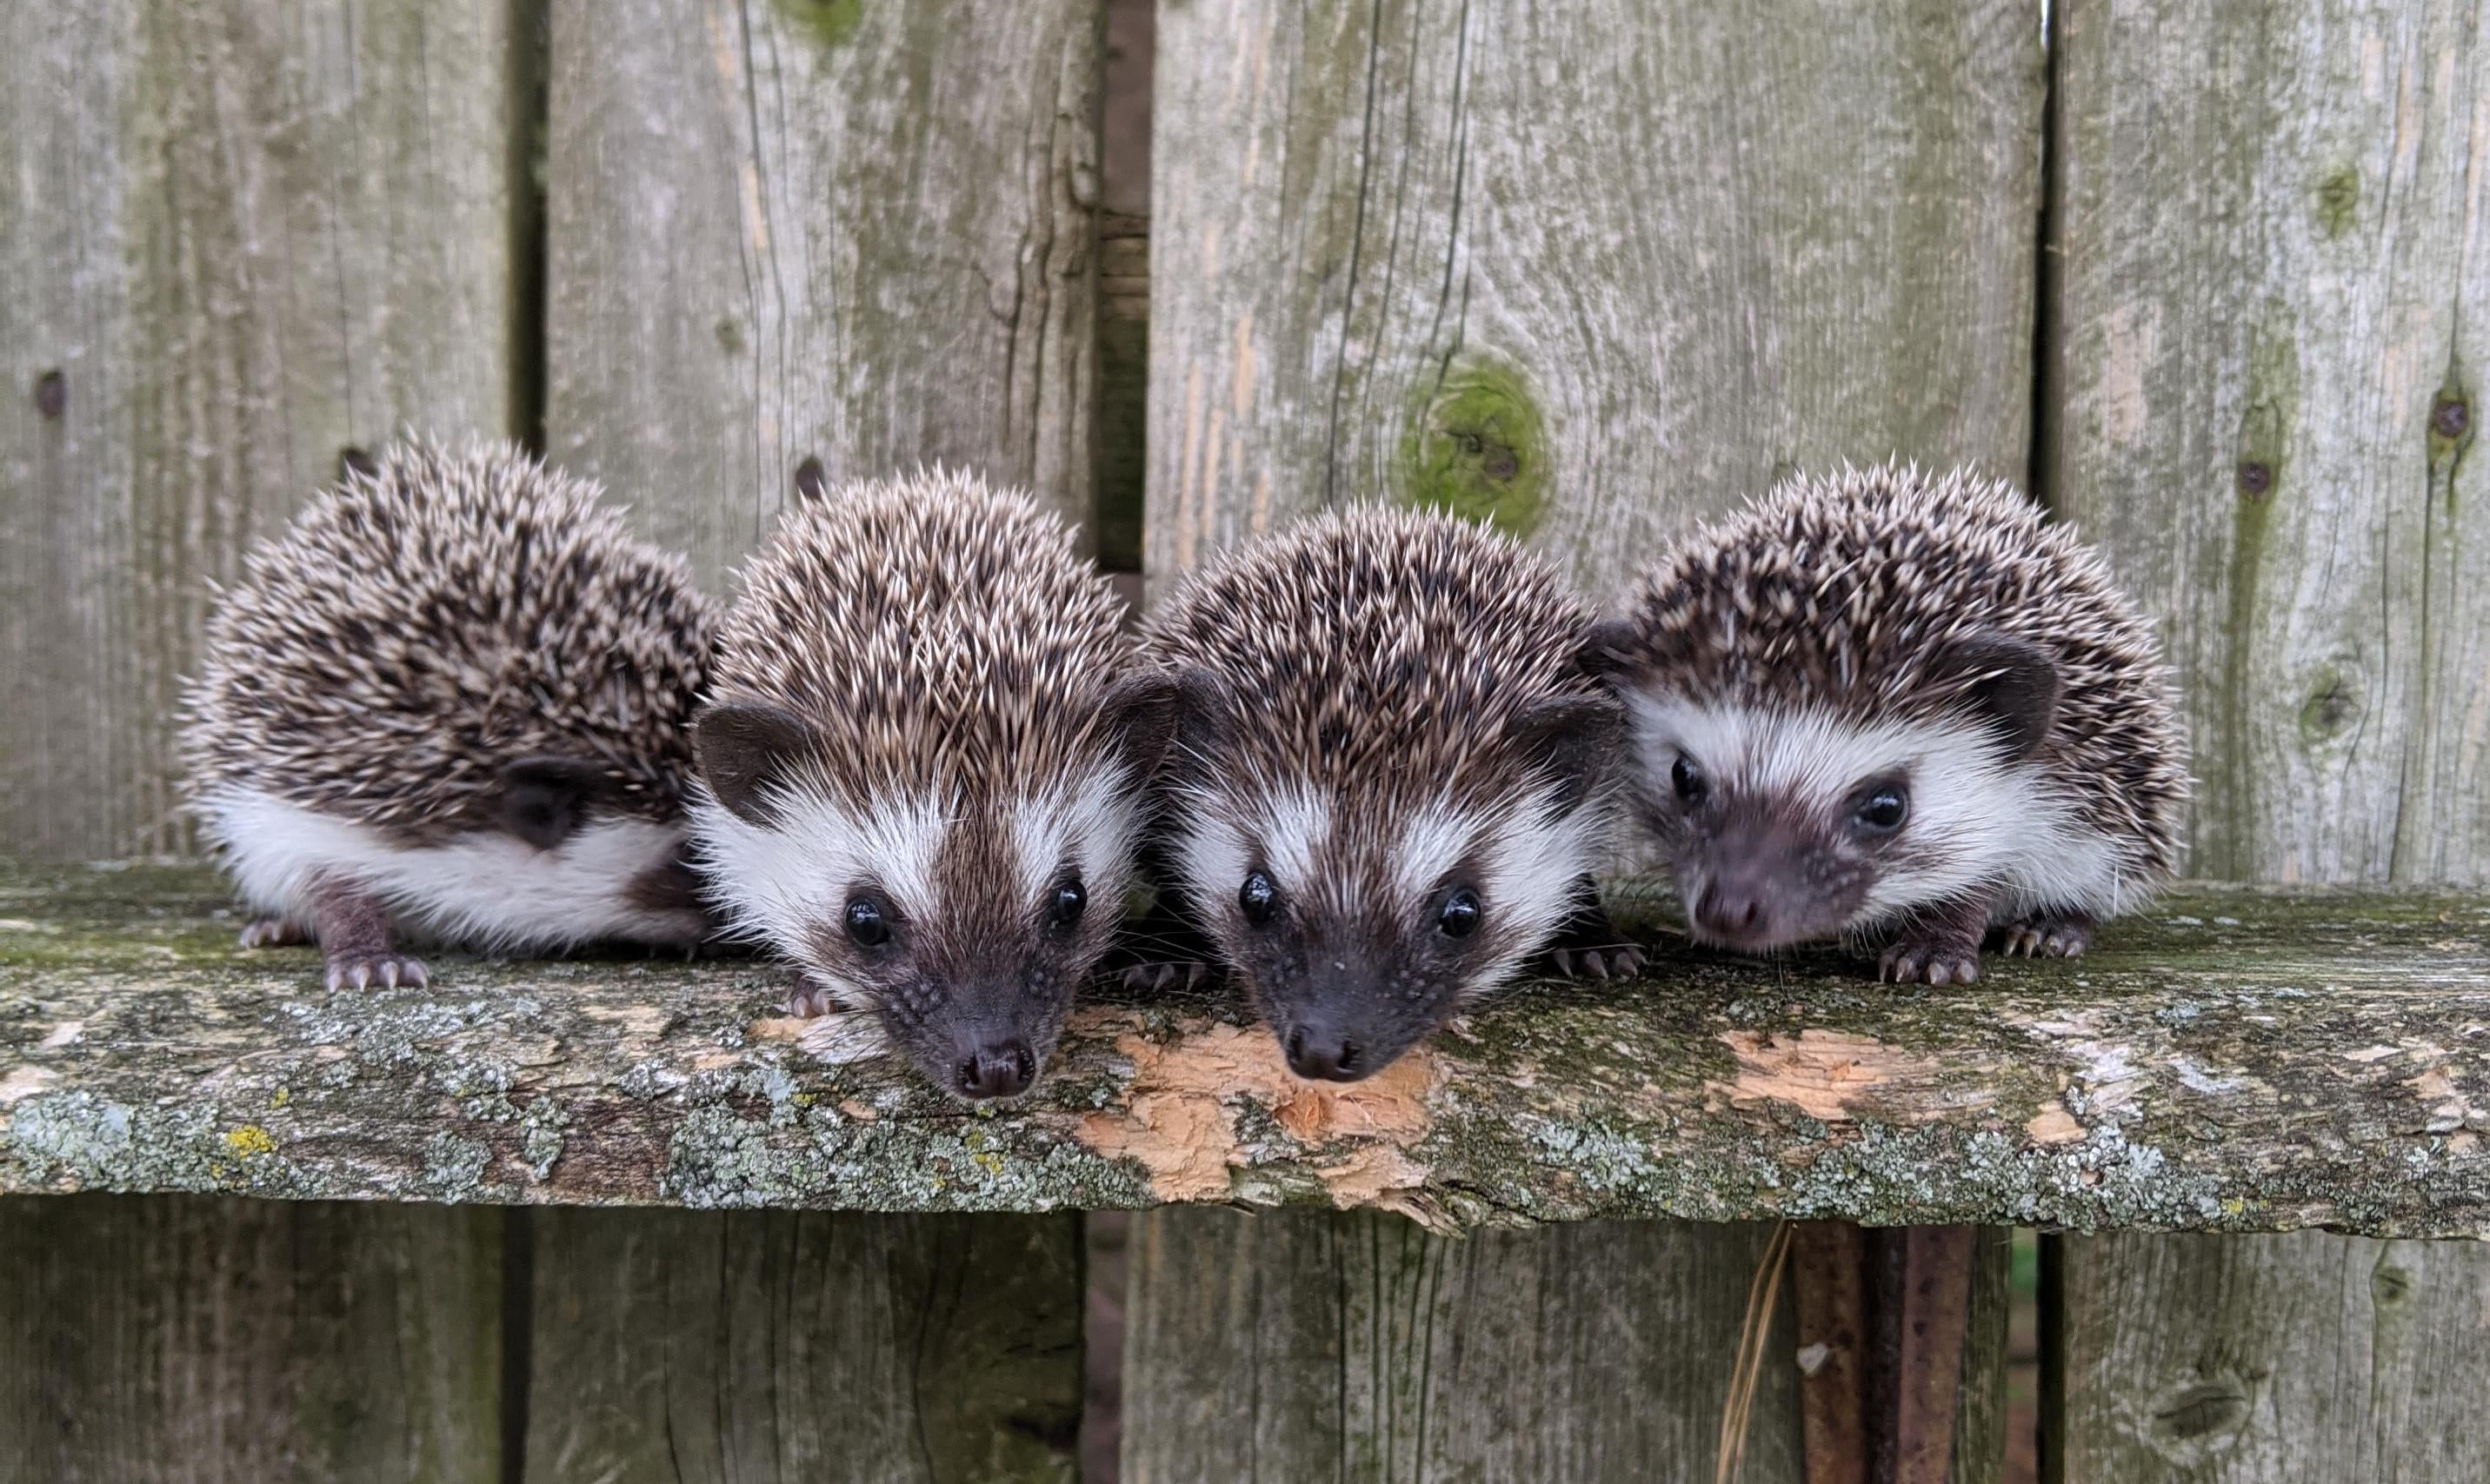 What's a group of hedgehogs called?